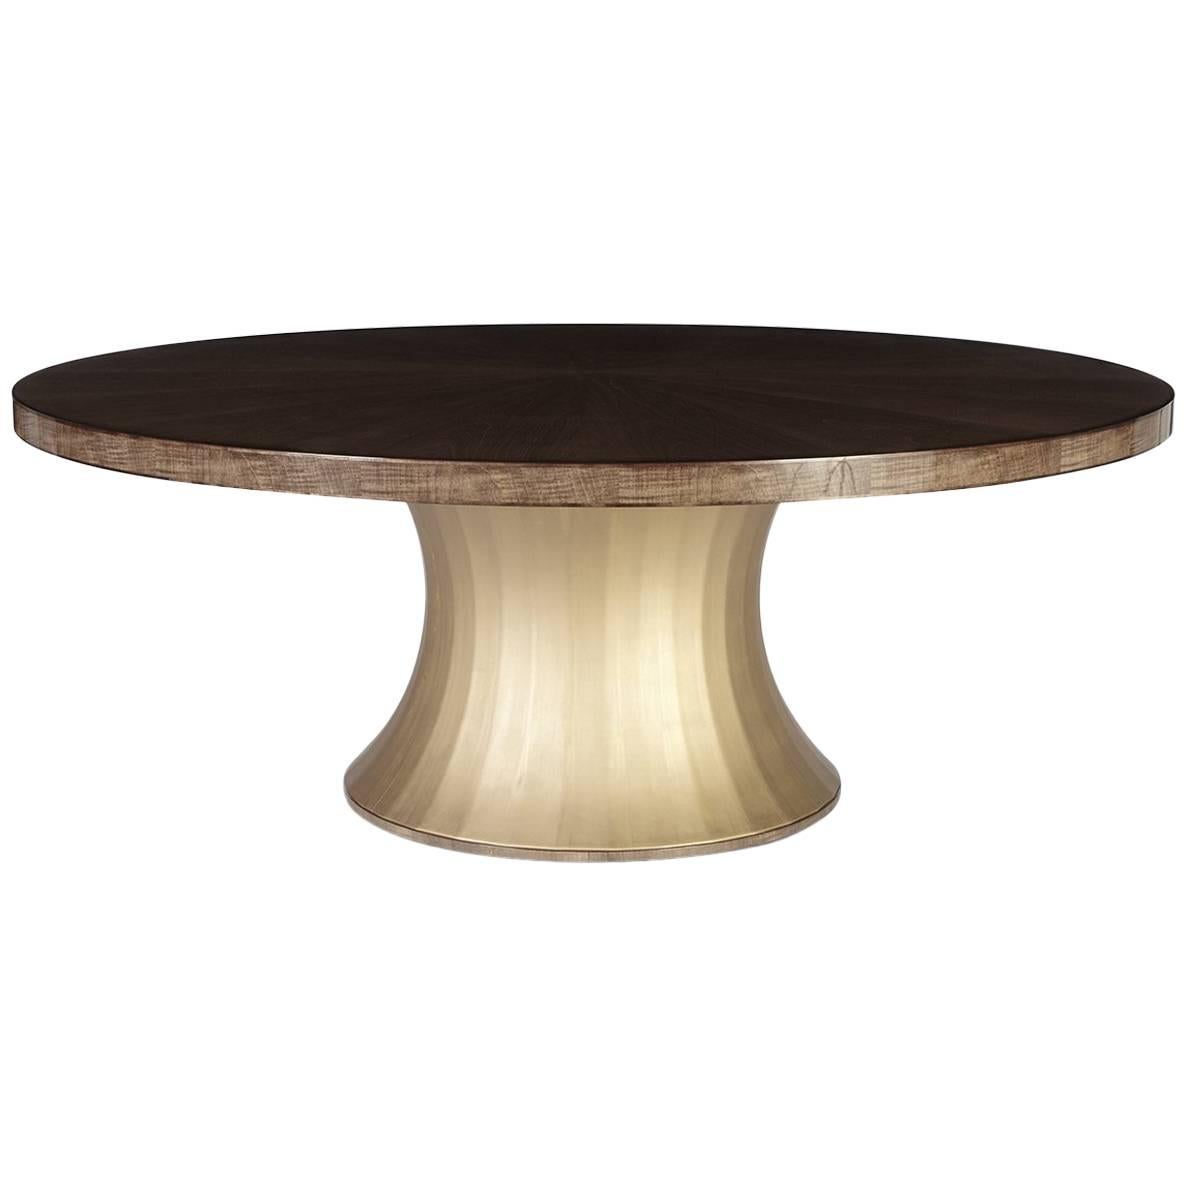 Davidson's Modern, Circular Rosebery Dining Table in Sycamore Dusk and Gold Leaf